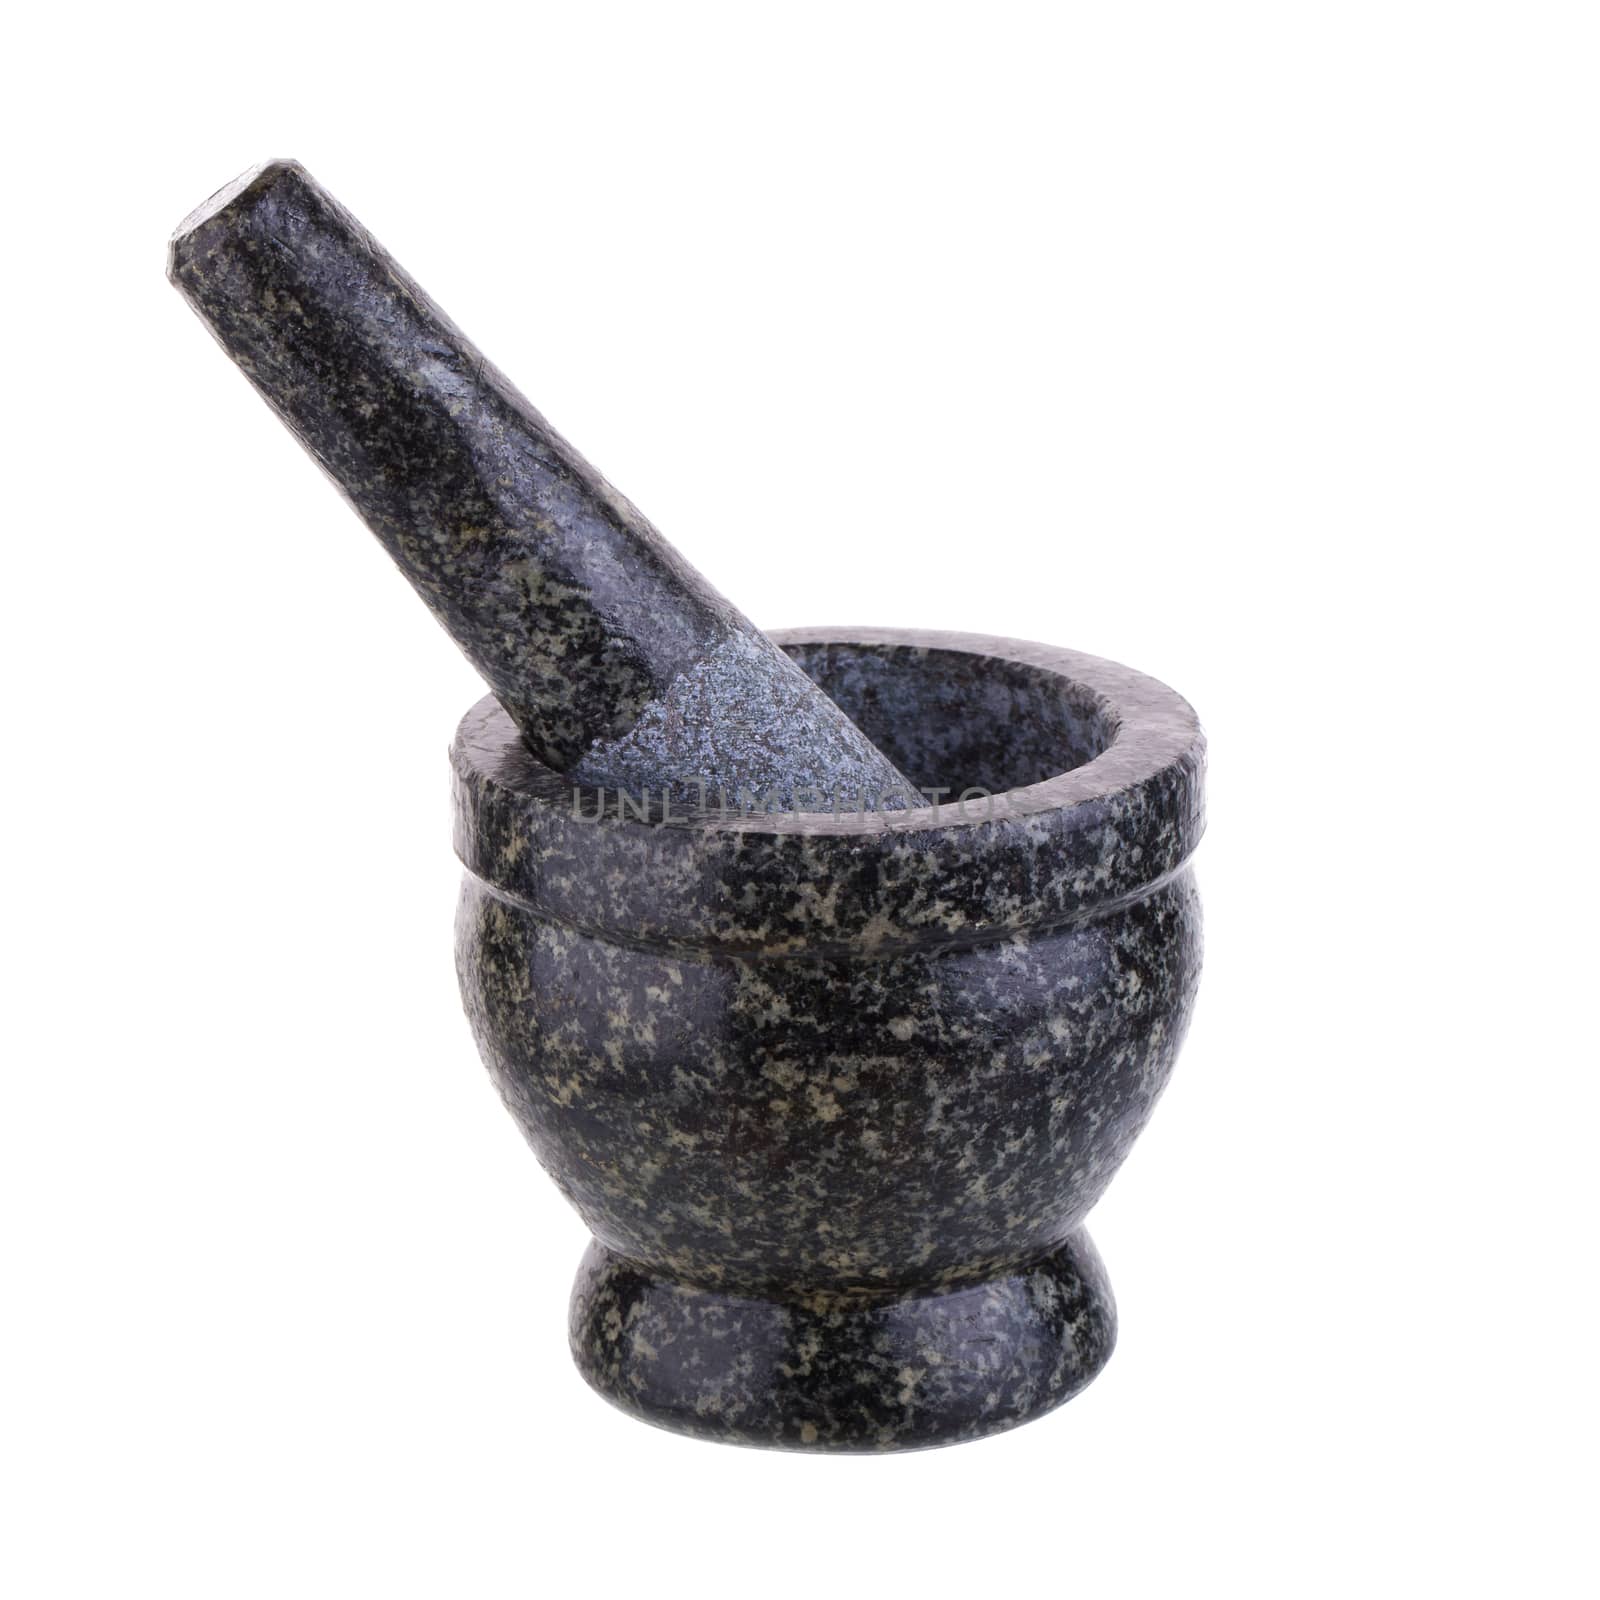 Stone Mortar and Pestle isolated on white background.